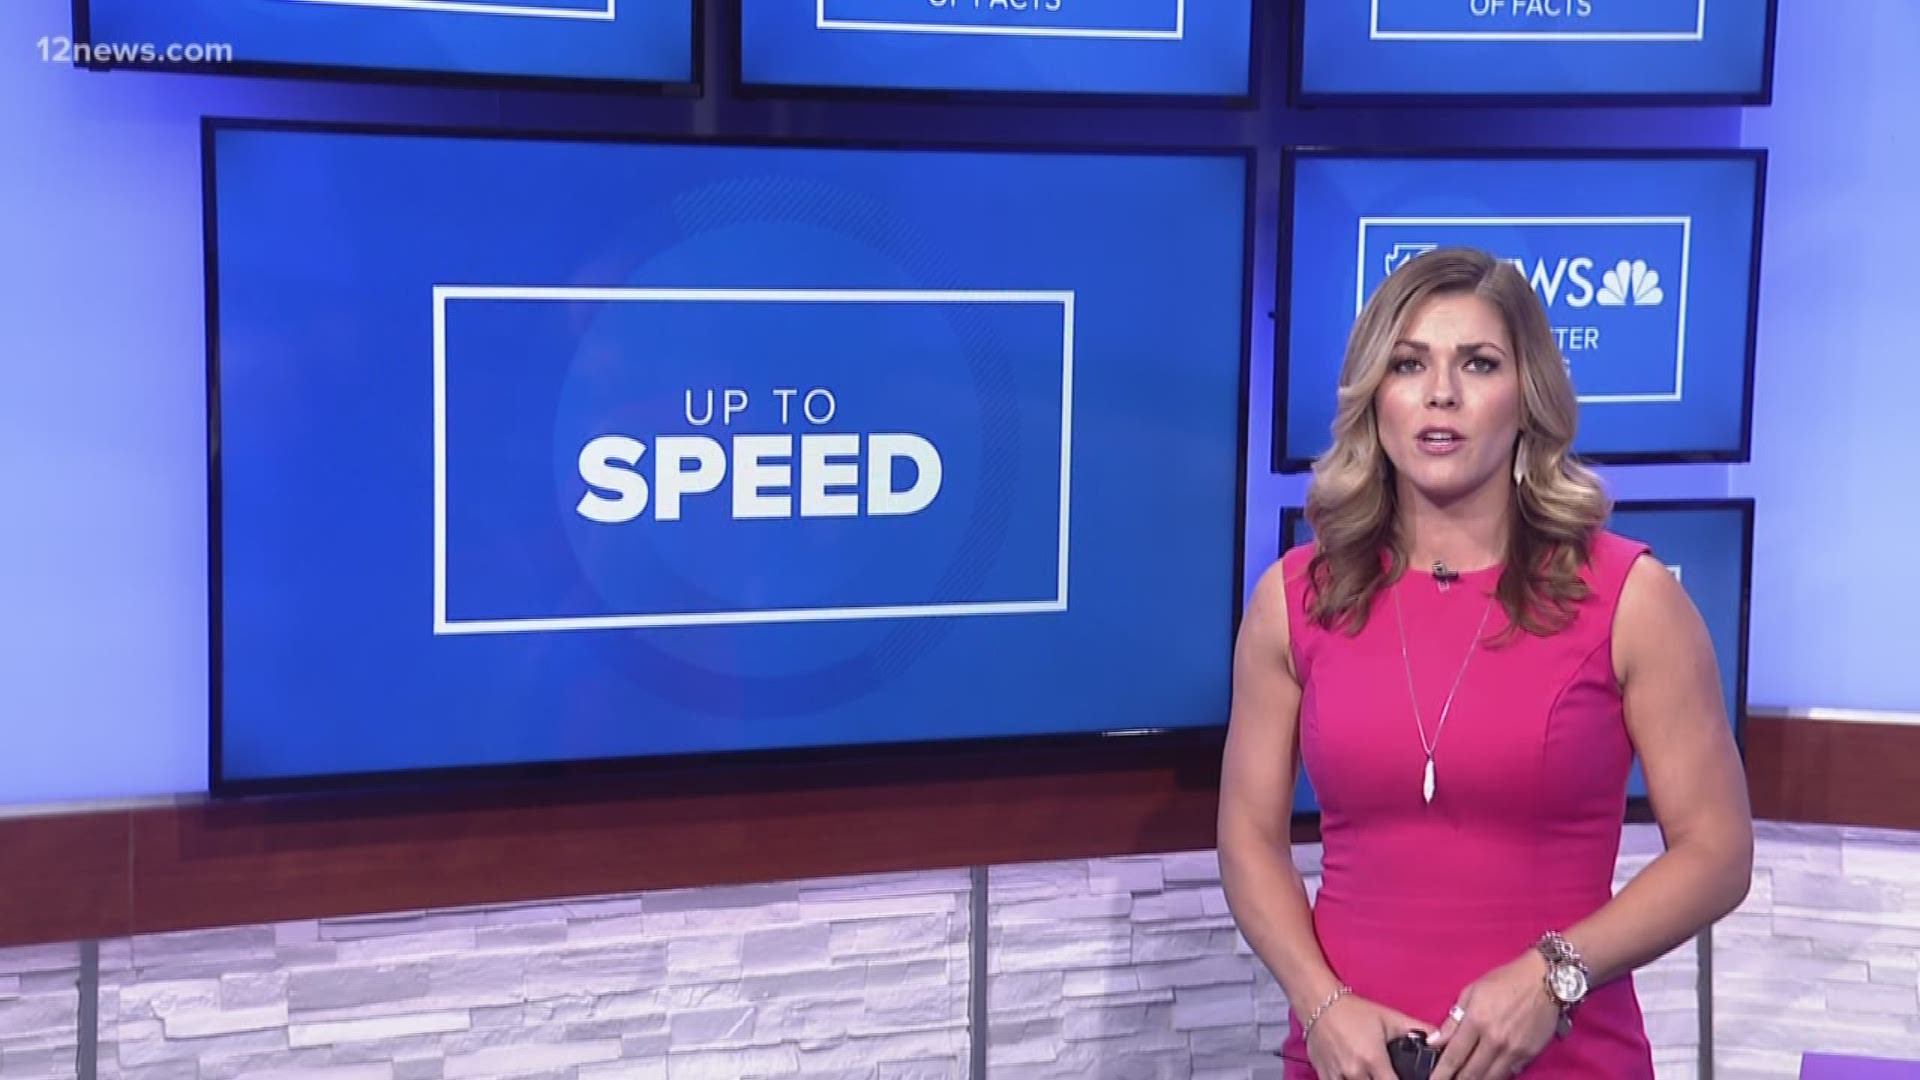 Get "Up to Speed" with the latest news Saturday night.